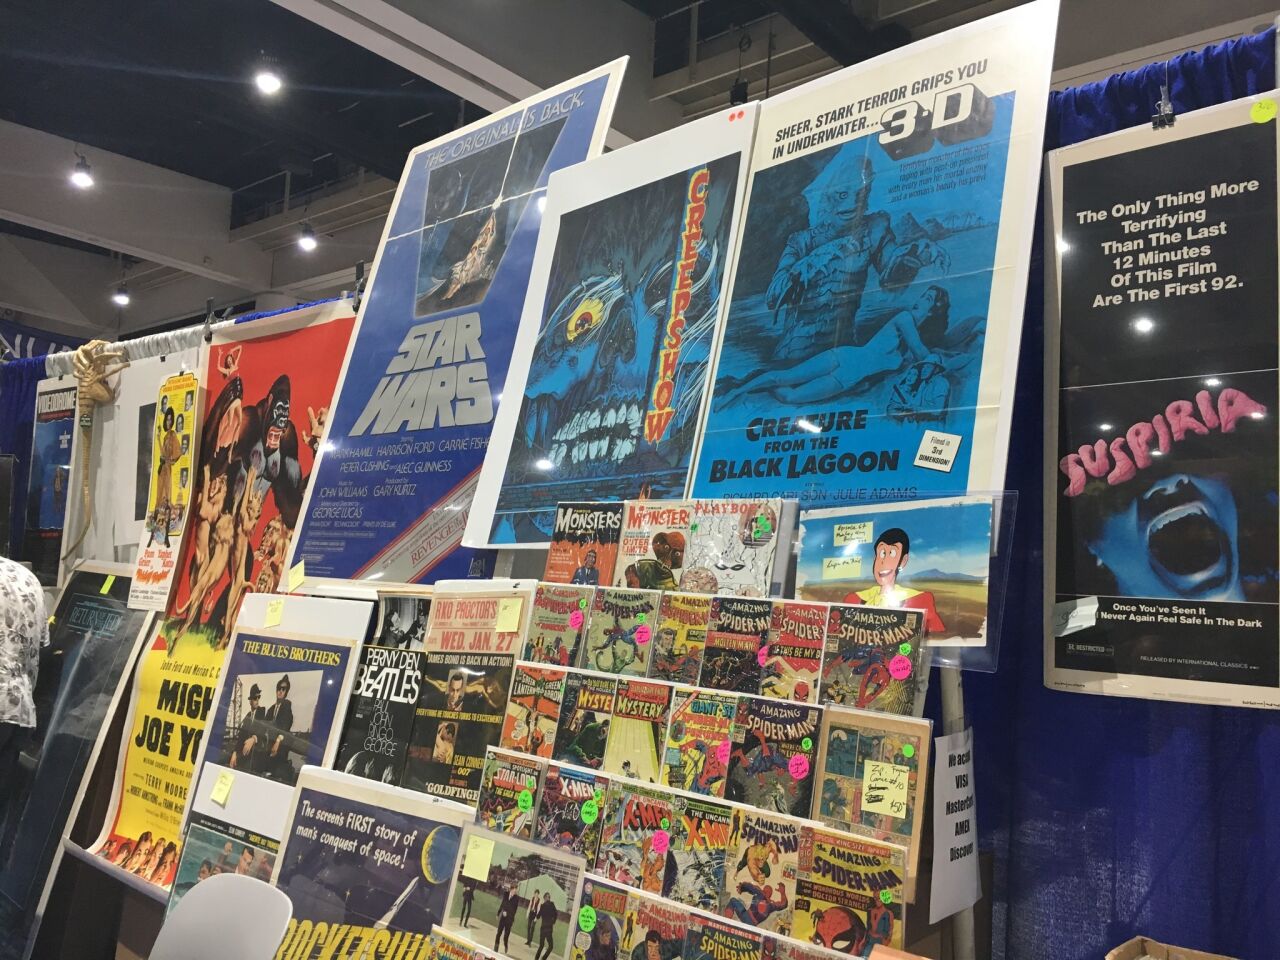 Comics and posters are on display at the Feel Art booth #723.